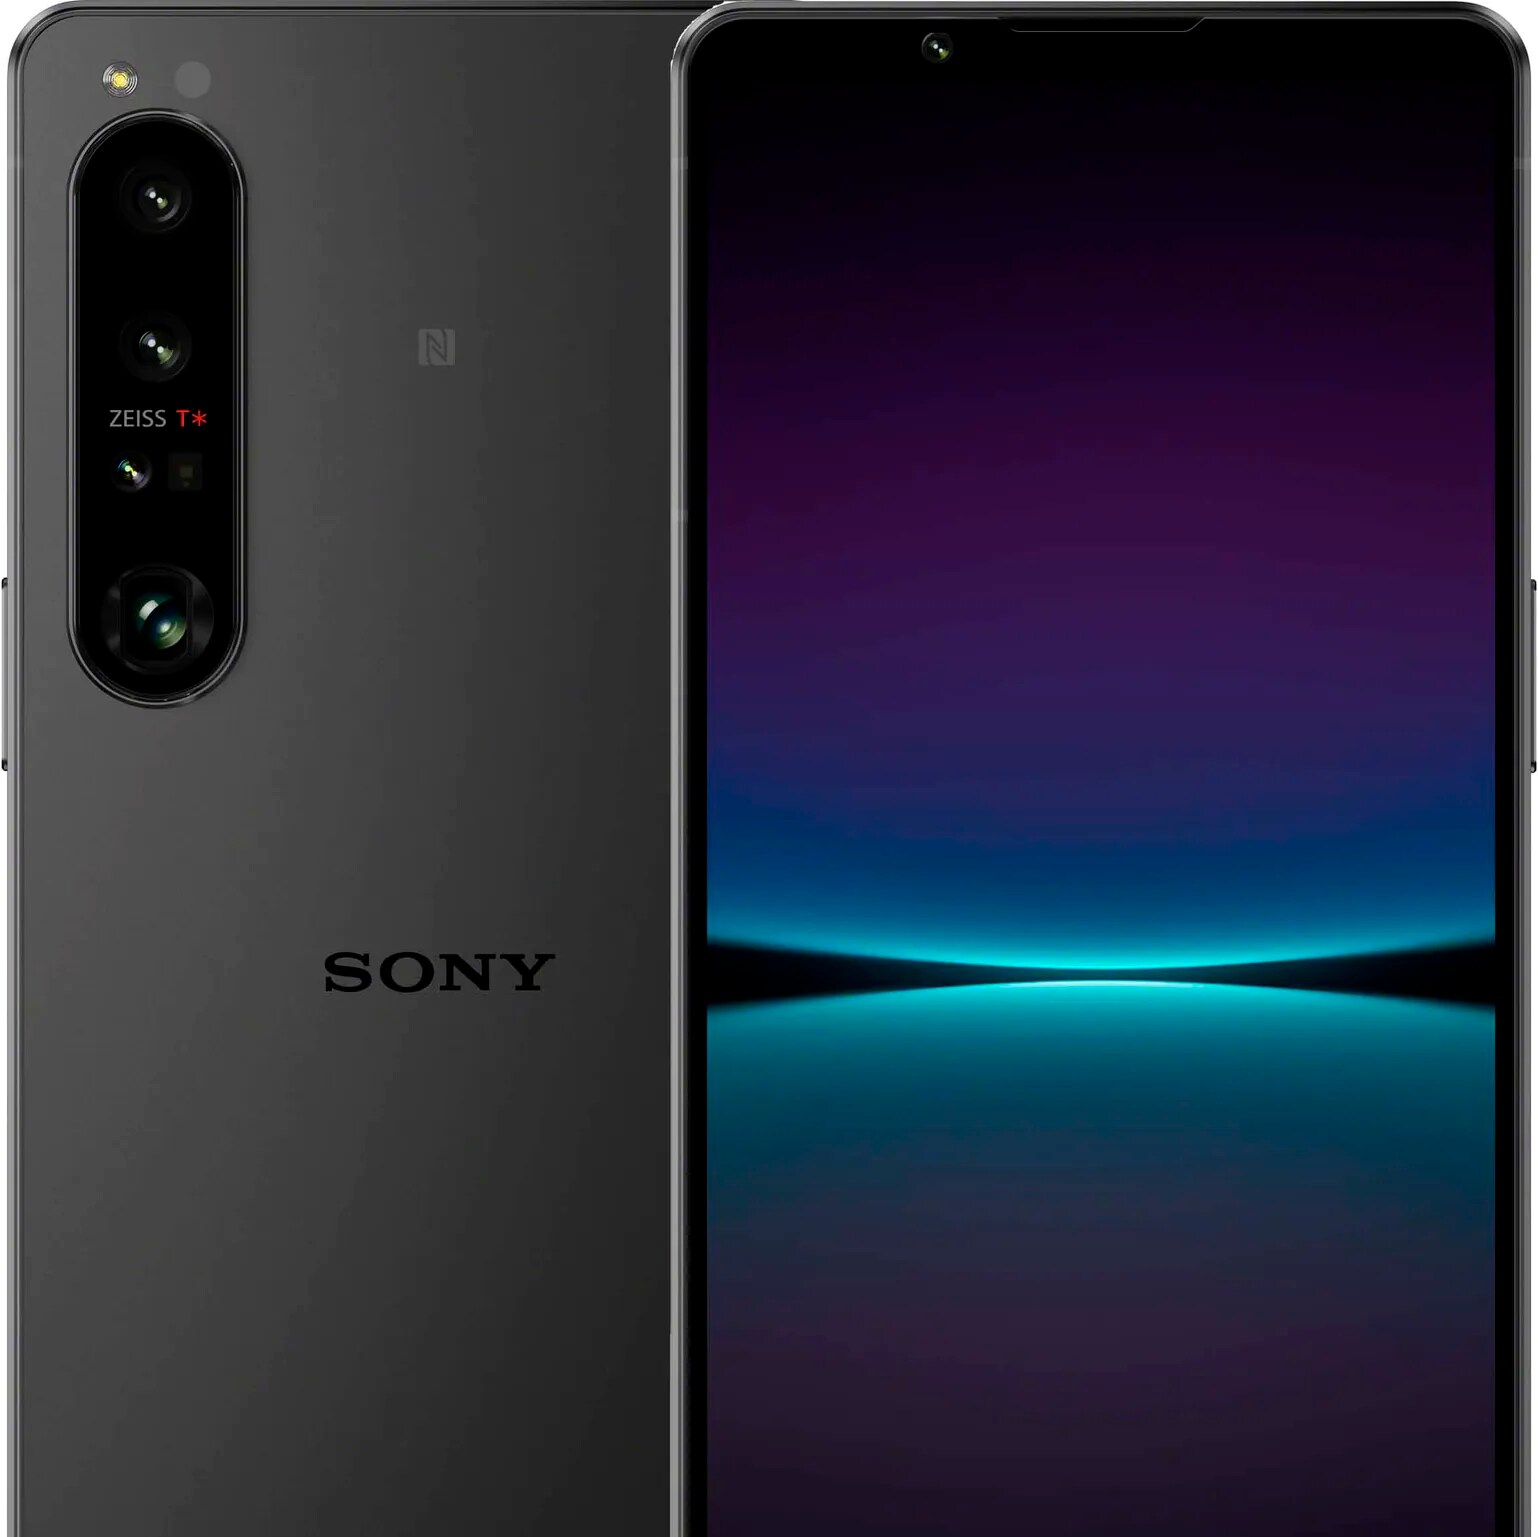 Sony Xperia 1 IV 5G seen from the back and front showing its cameras